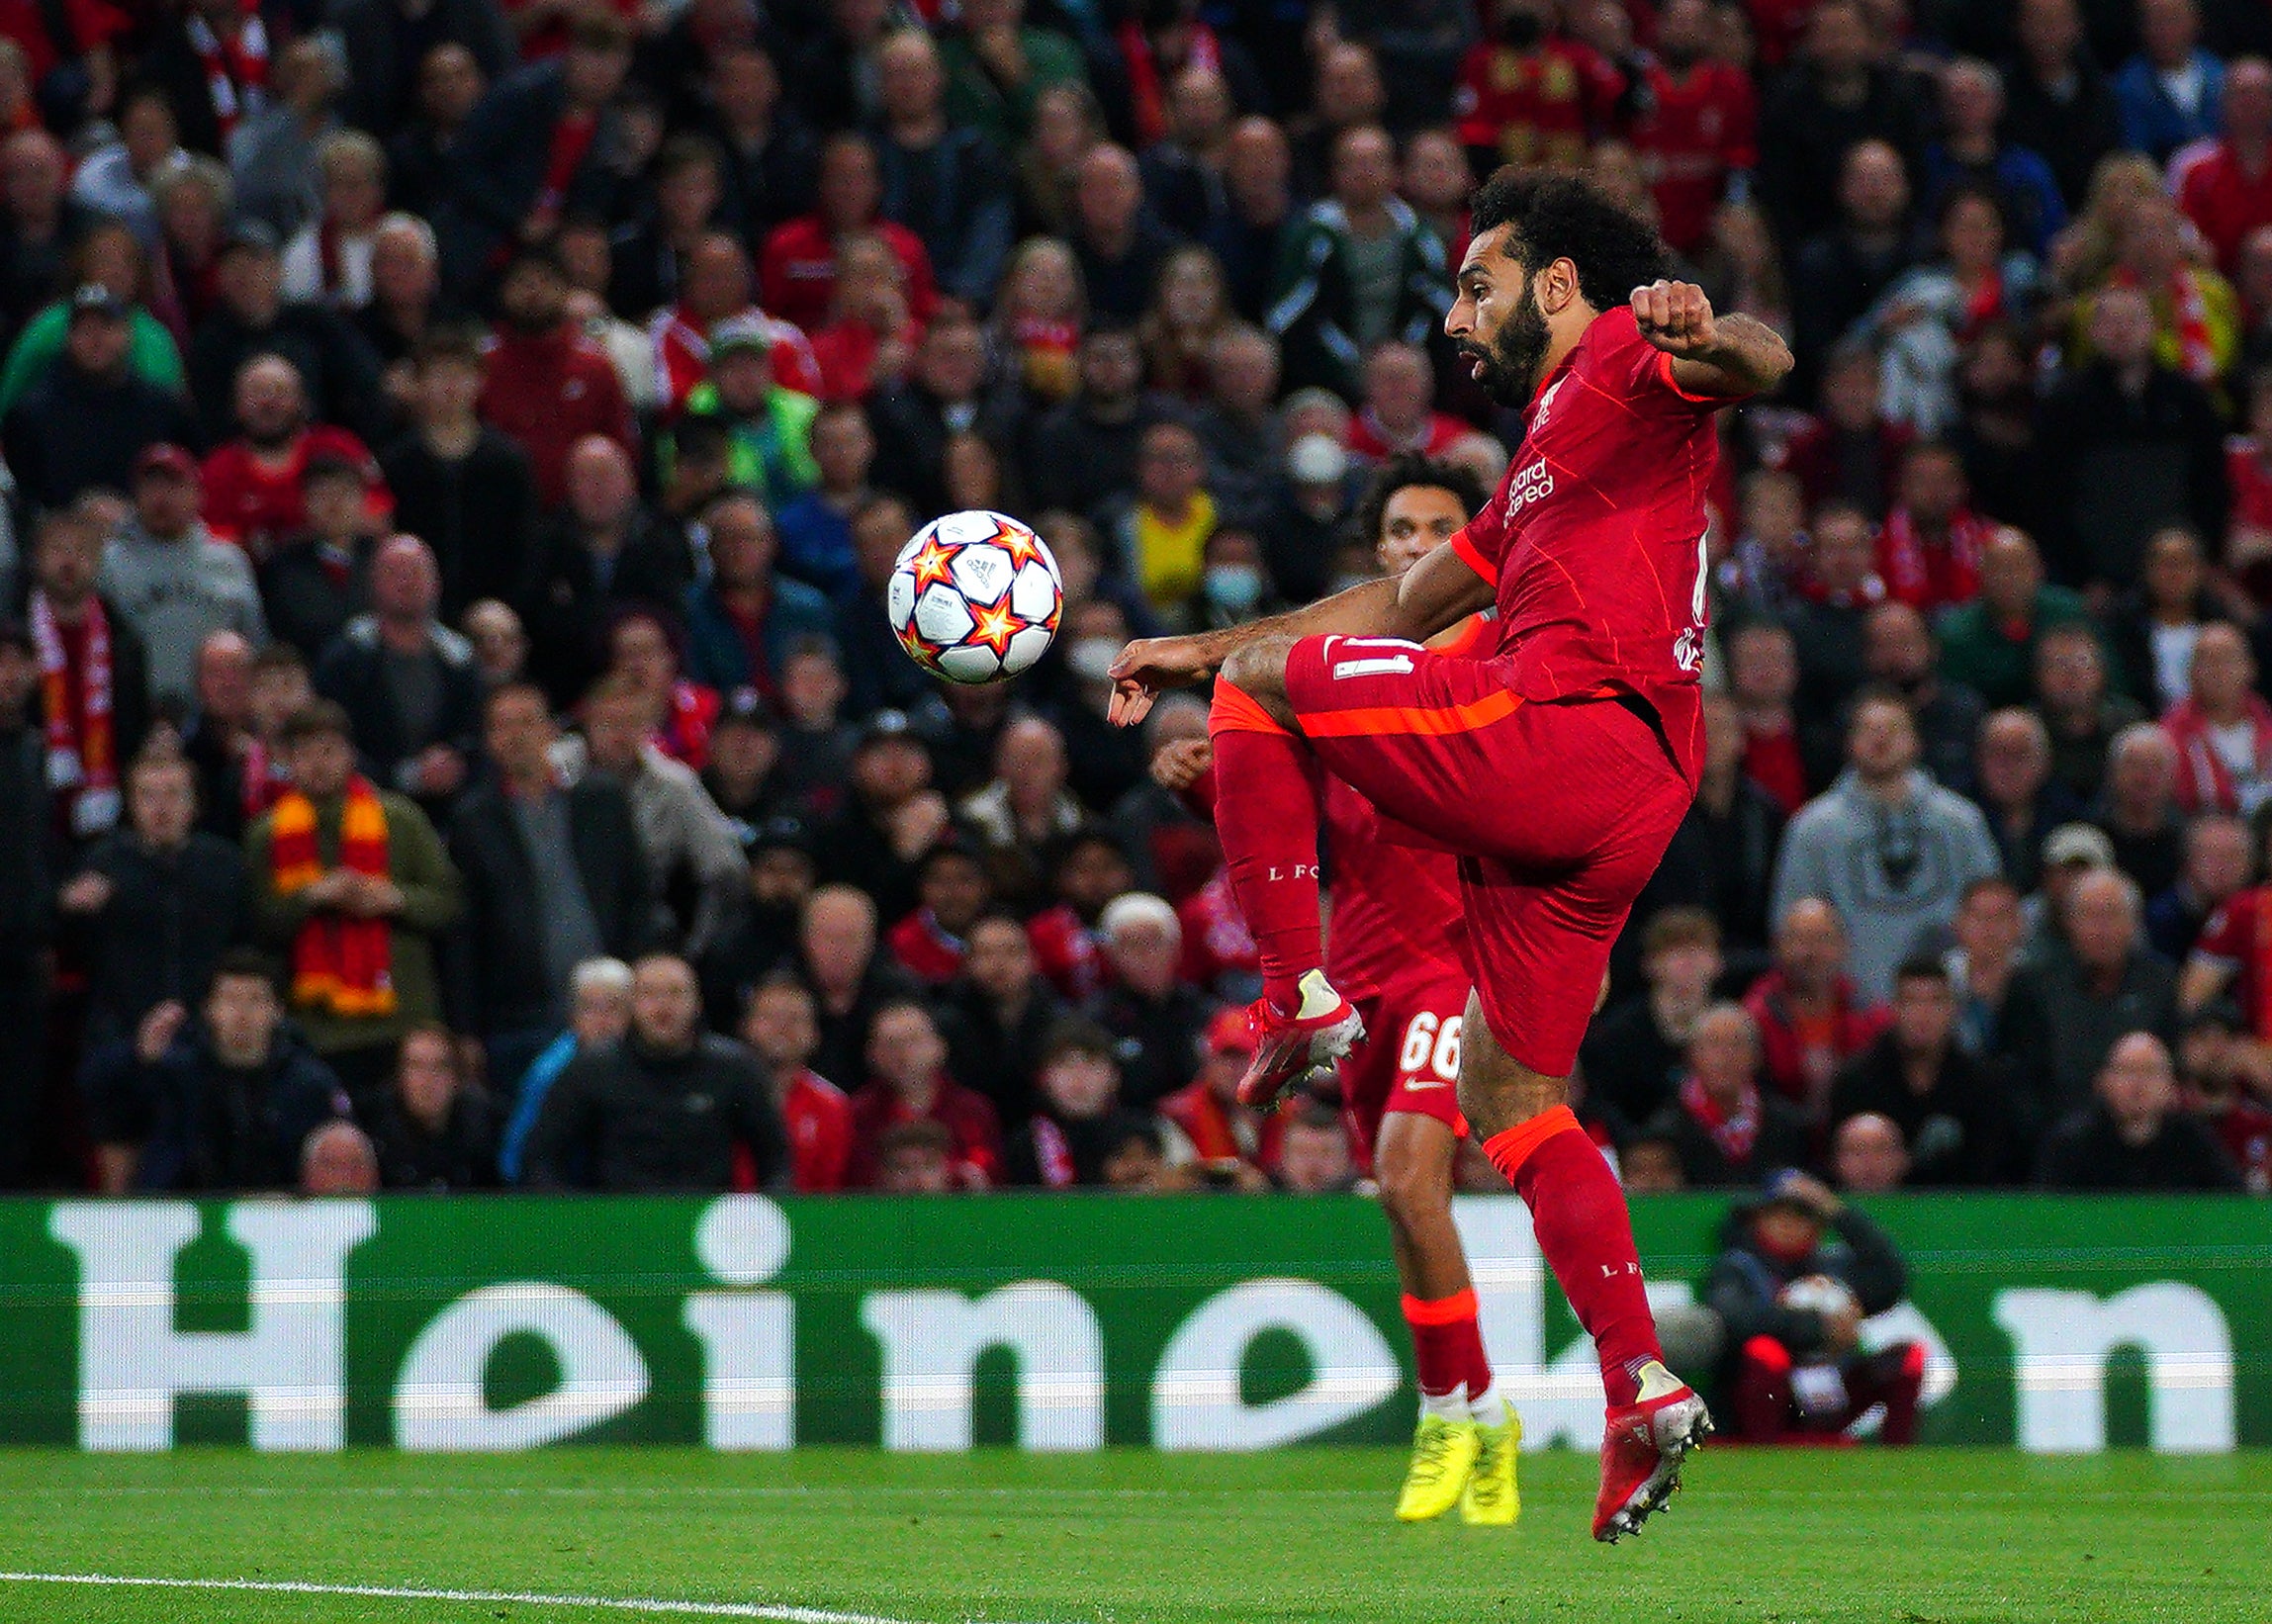 Mohamed Salah makes it 2-2 against AC Milan in the Champions League tie at Anfield.